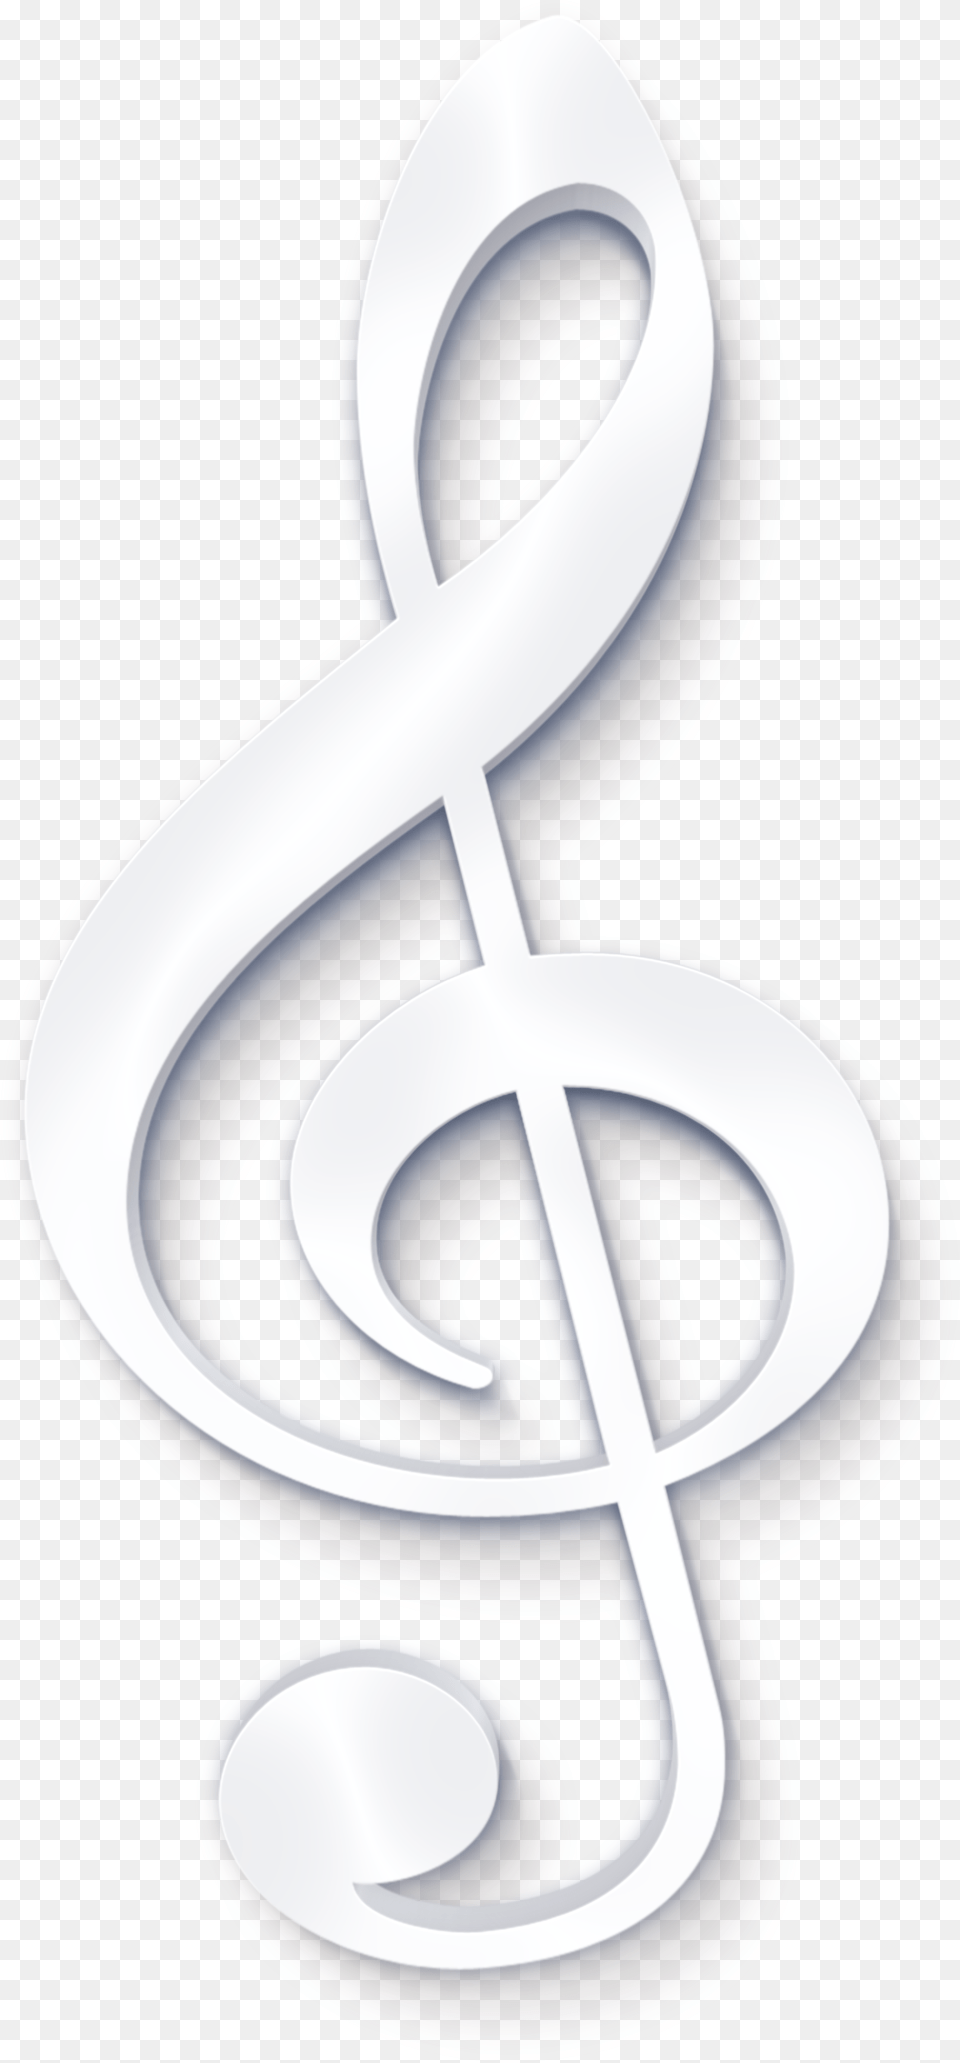 Treble Clef Music Free On Pixabay Music Symbol In White, Alphabet, Ampersand, Text, Number Png